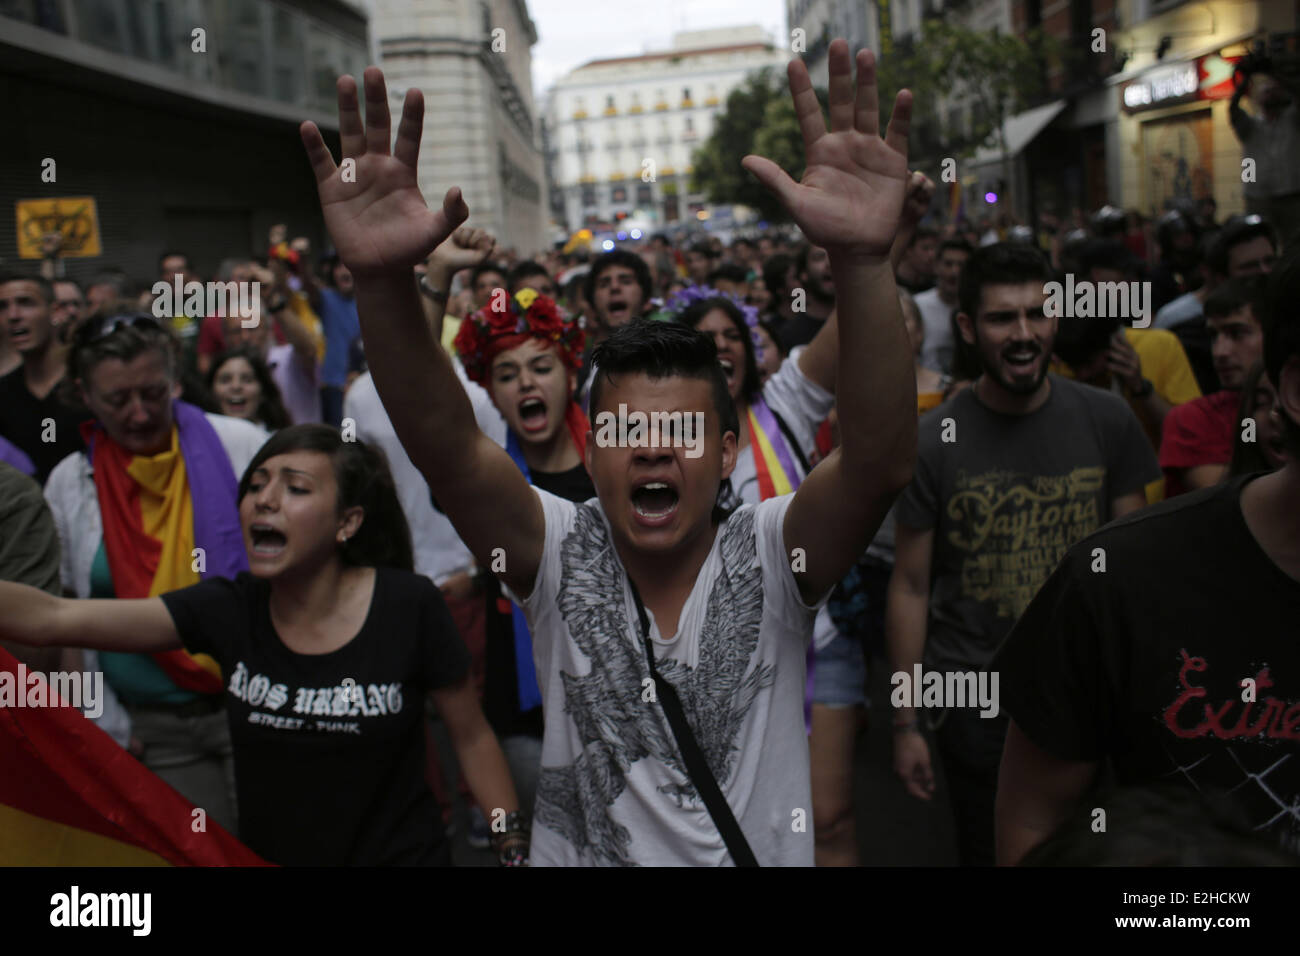 Madrid, Spain. 19th June, 2014. Protestors shout slogans during a demonstration against the Monarchy in Madrid, Spain, Thursday, June 19, 2014. Dozens of protestors gathered in Madrid's main square to protest against the Spanish Monarchy on the day Spain's King Felipe VI was crowned. Credit:  Rodrigo Garcia/NurPhoto/ZUMAPRESS.com/Alamy Live News Stock Photo